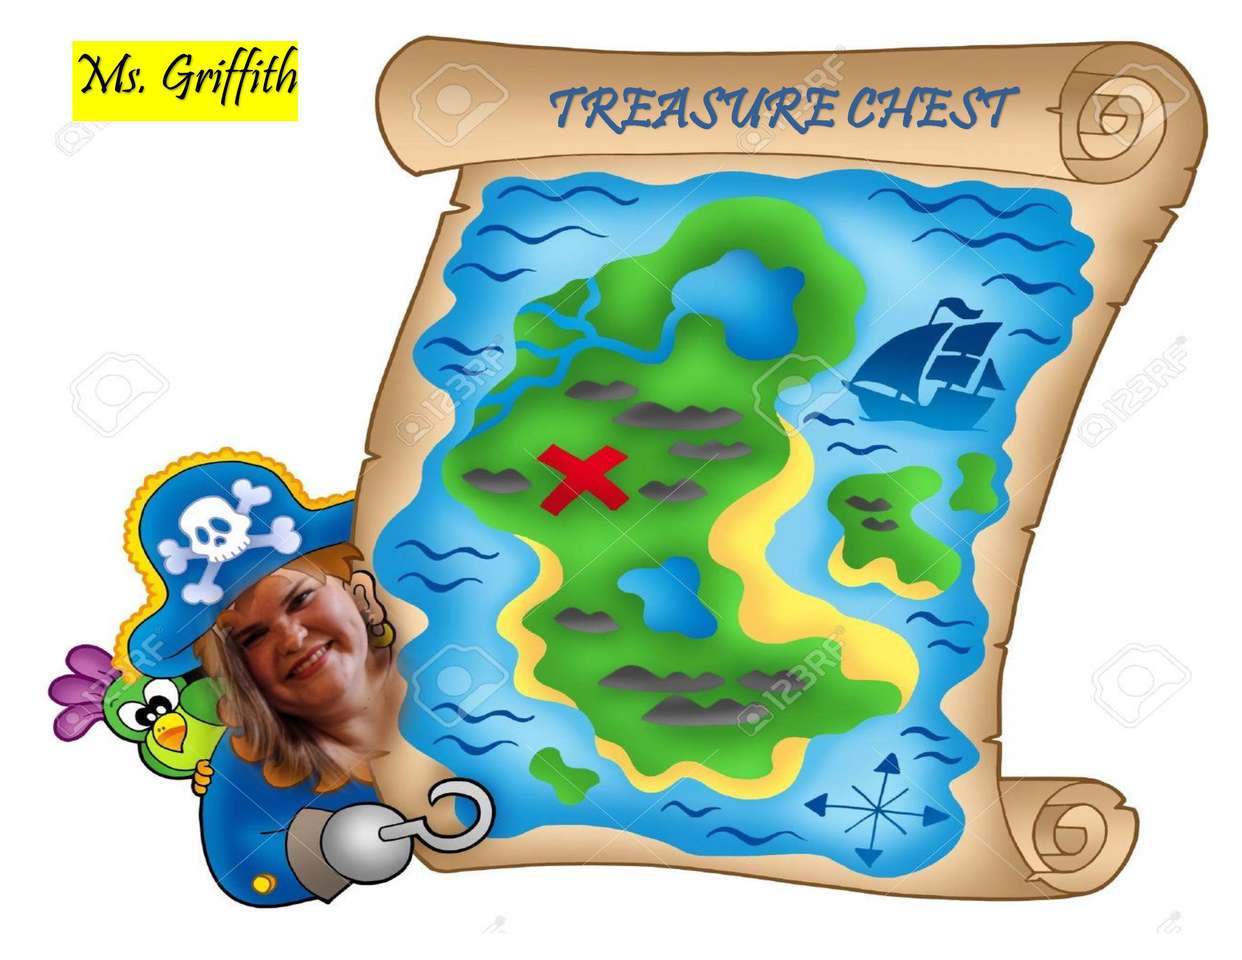 treasure chest 3 puzzle online from photo